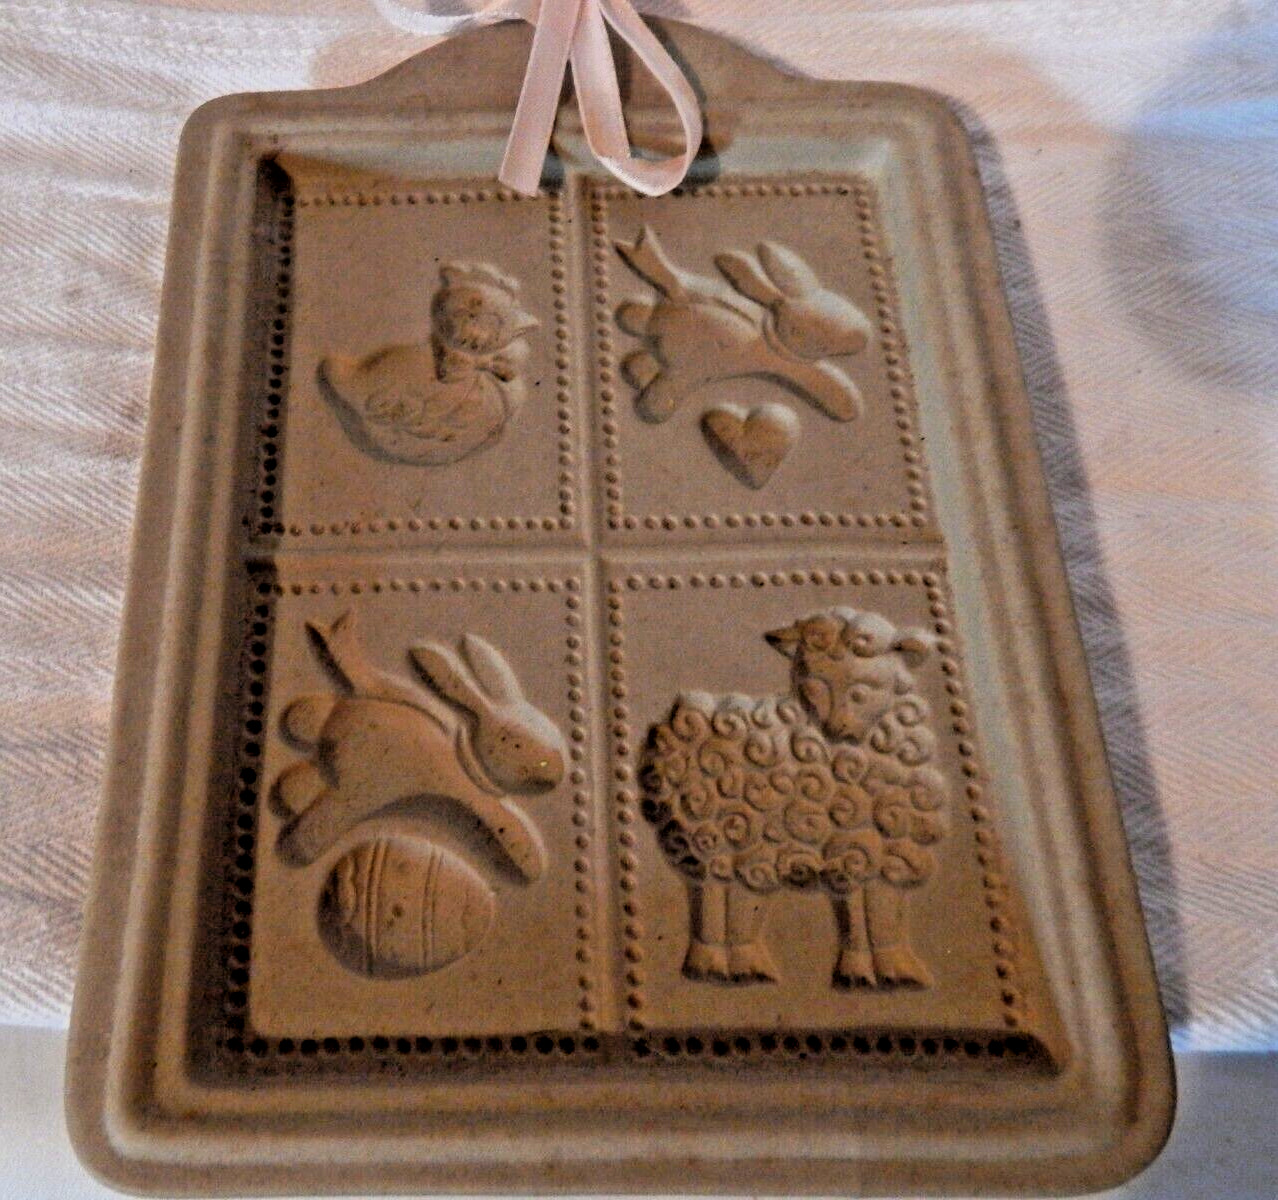 Vintage Easter Cookie Mold Bunny Rabbit with egg, Rabbit with heart, Chick, Lamb